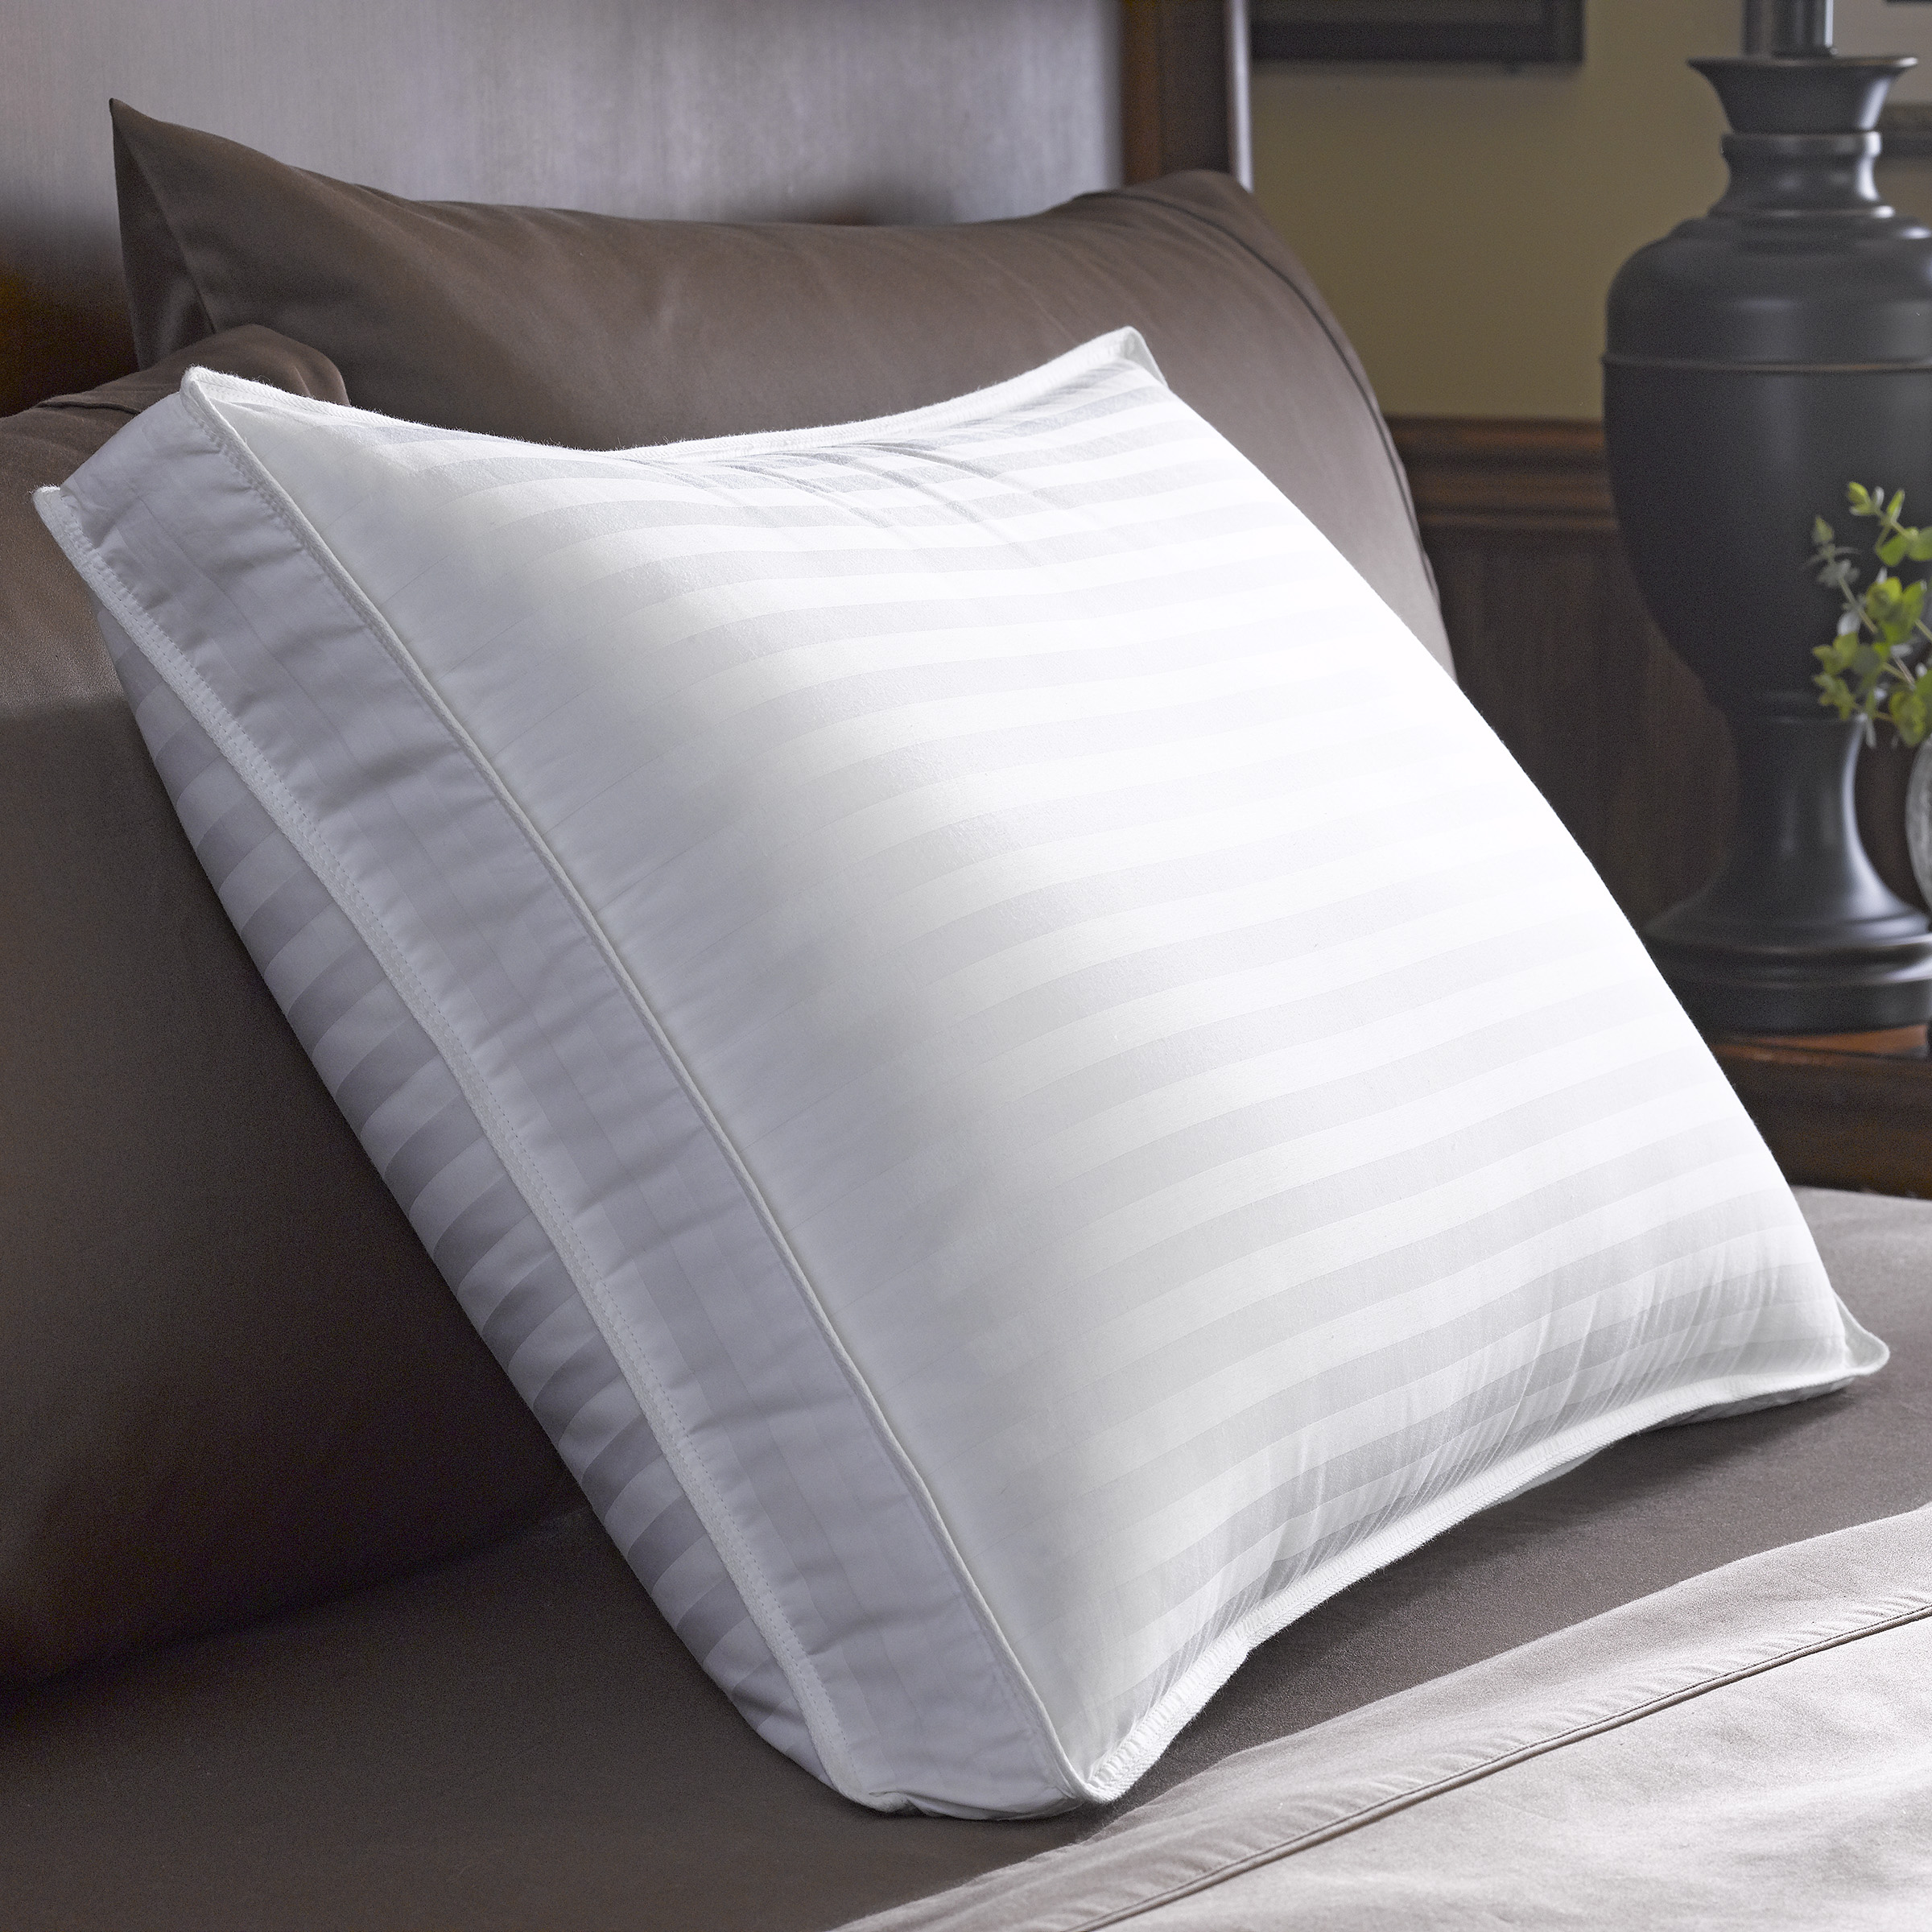 GoLinens Pacific Coast Restful Nights White Down Surround Cotton Pillows - Extra Firm Densityfor Stomach Sleepers (5 yrs Mfr's Warranty)